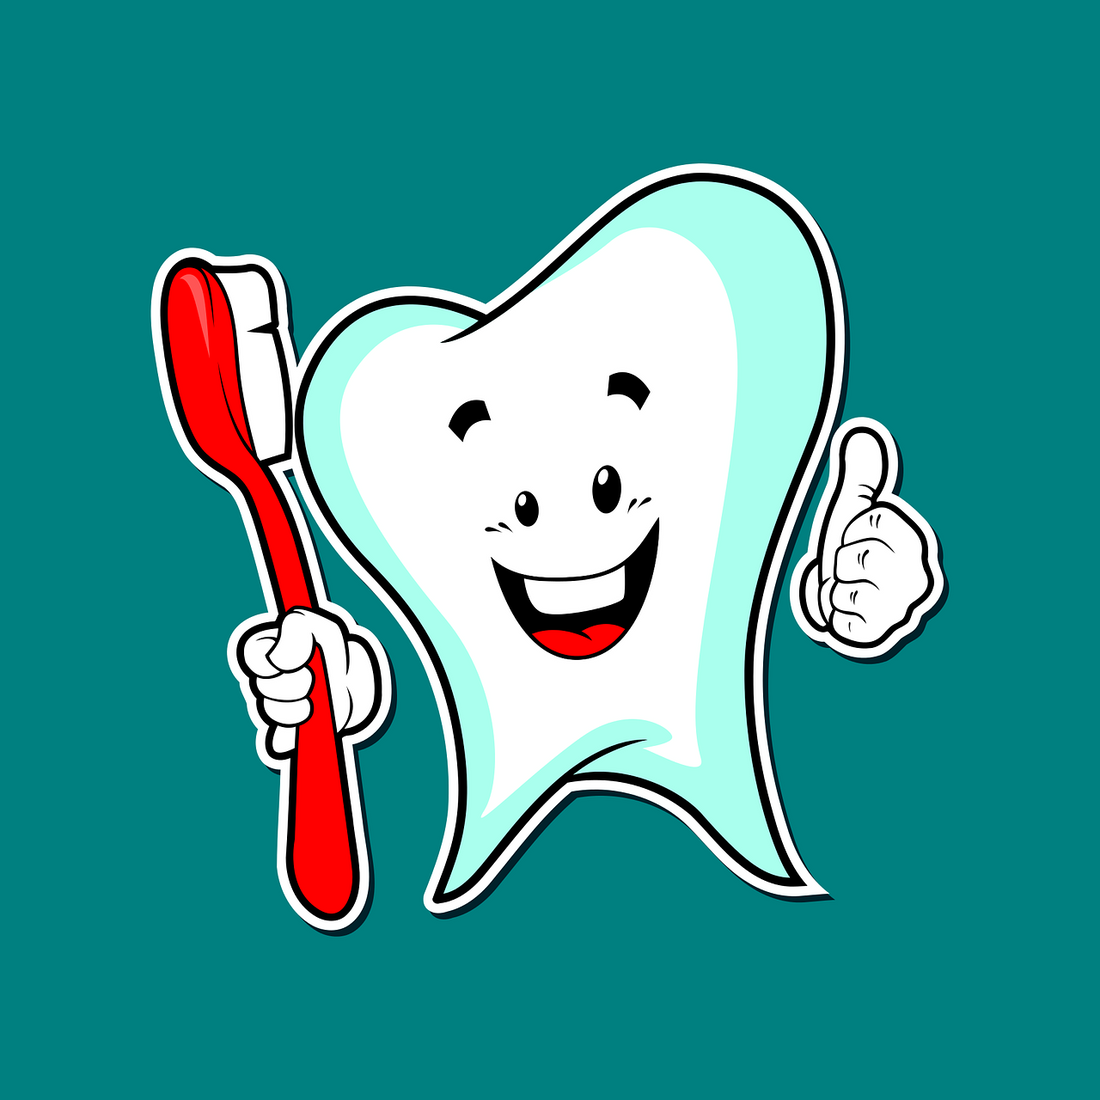 Smiling cartoon tooth holding a red toothbrush, for AutoBrush